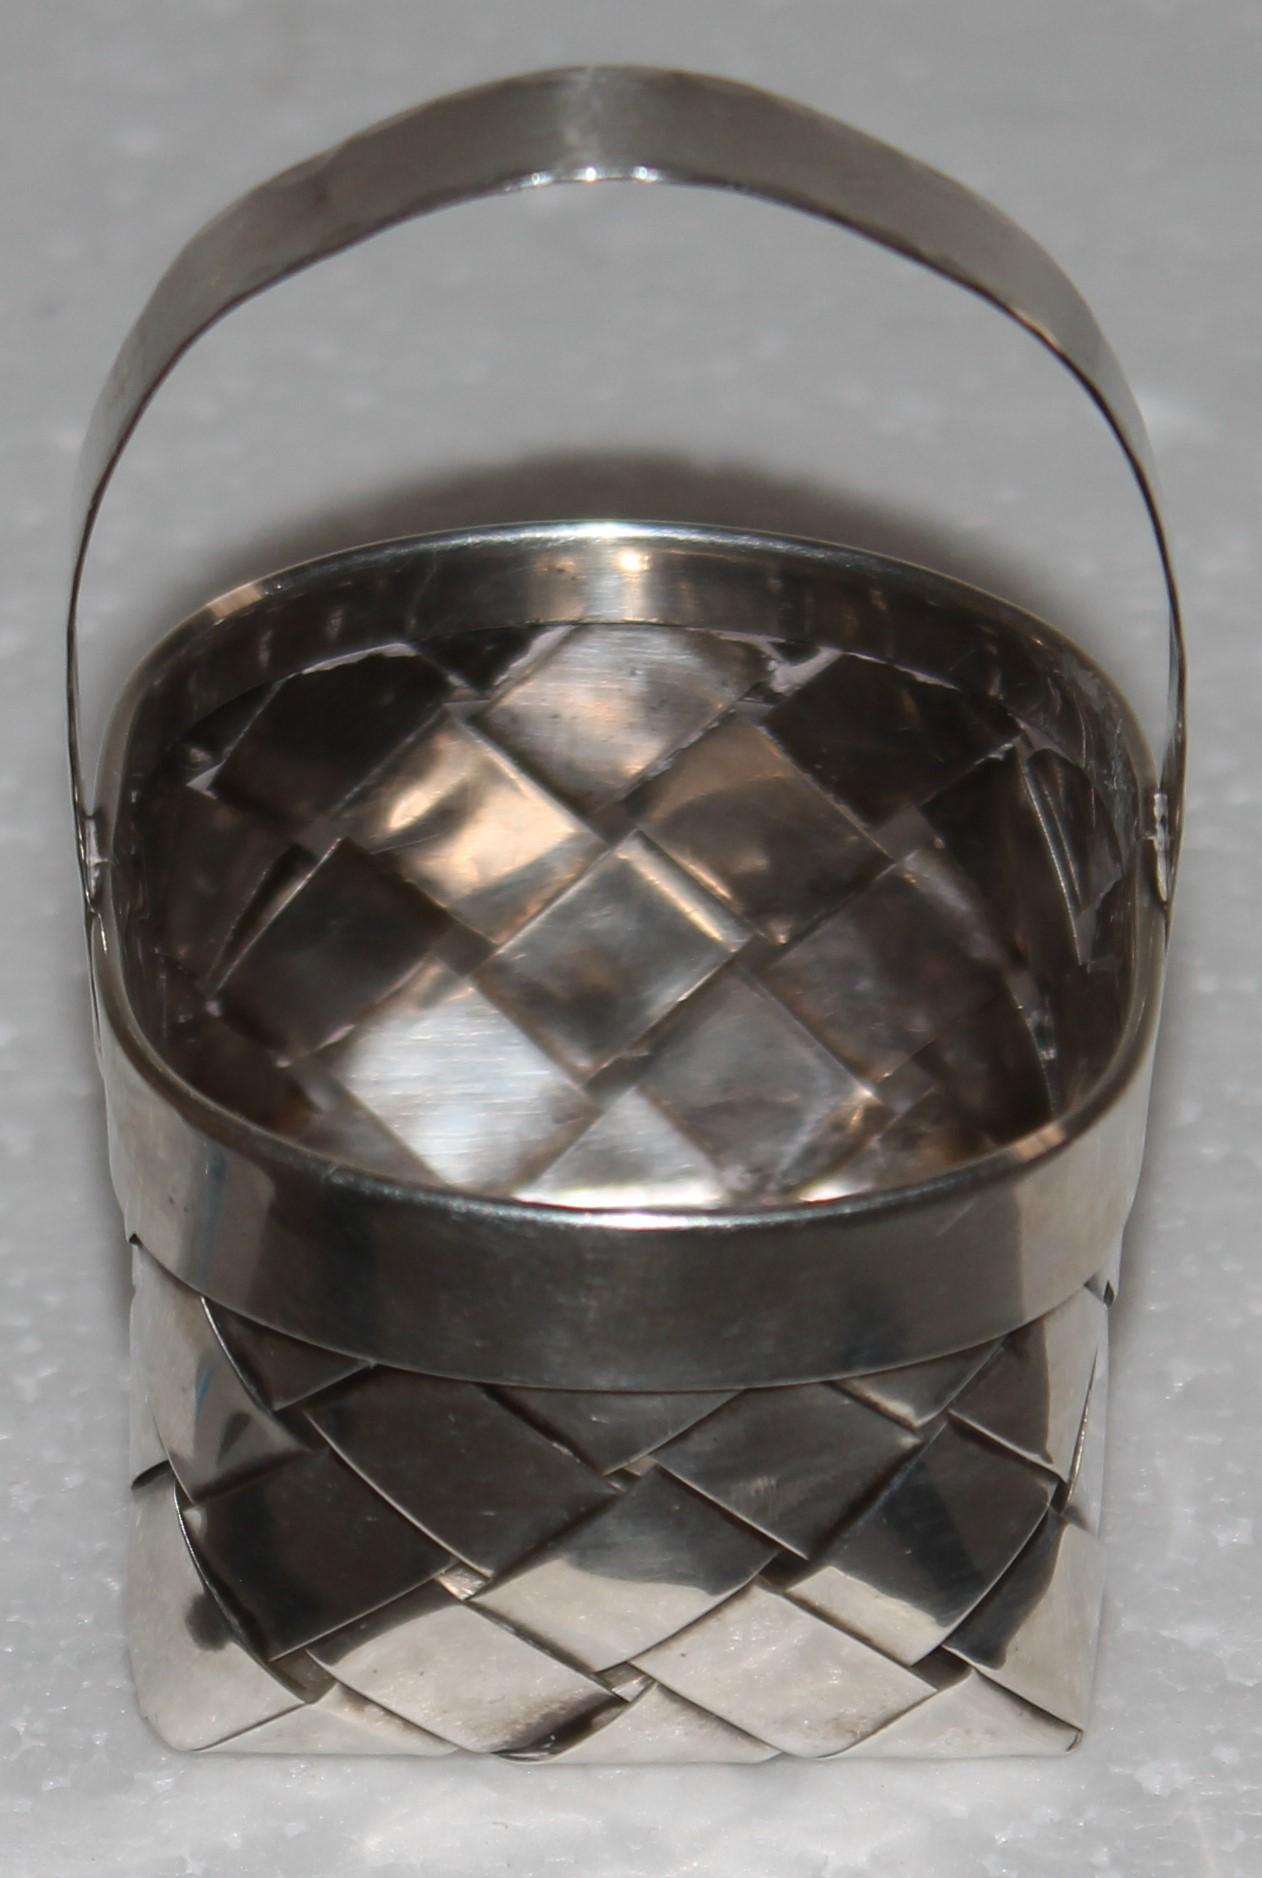 This fine construction signed hand made Cartier sterling silver ( heavy weight ) basket is in fine condition. These are quite rare to find in such great condition.